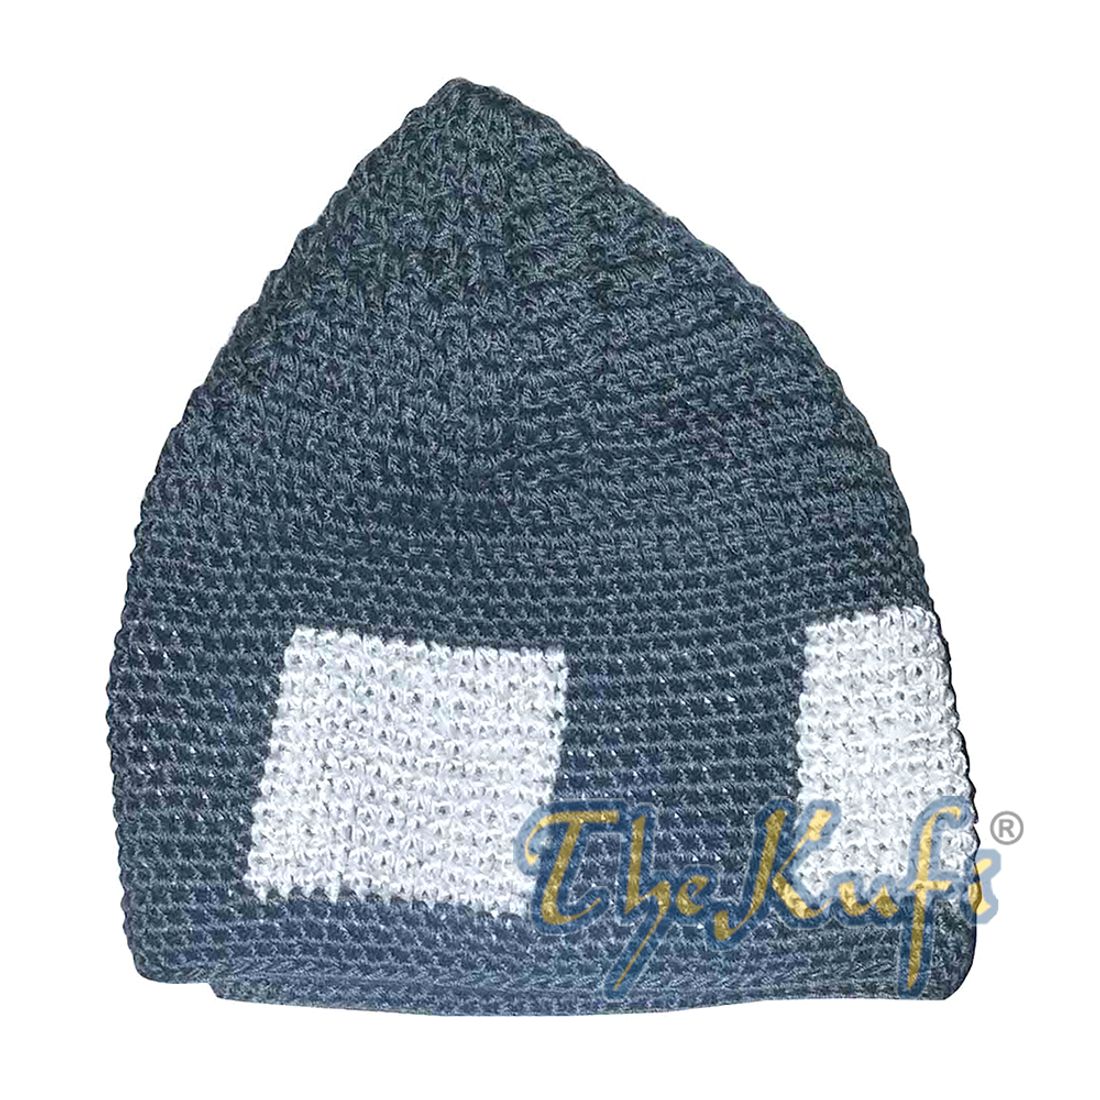 Hand-crocheted Dark Gray Kufi With White Squares For Kids